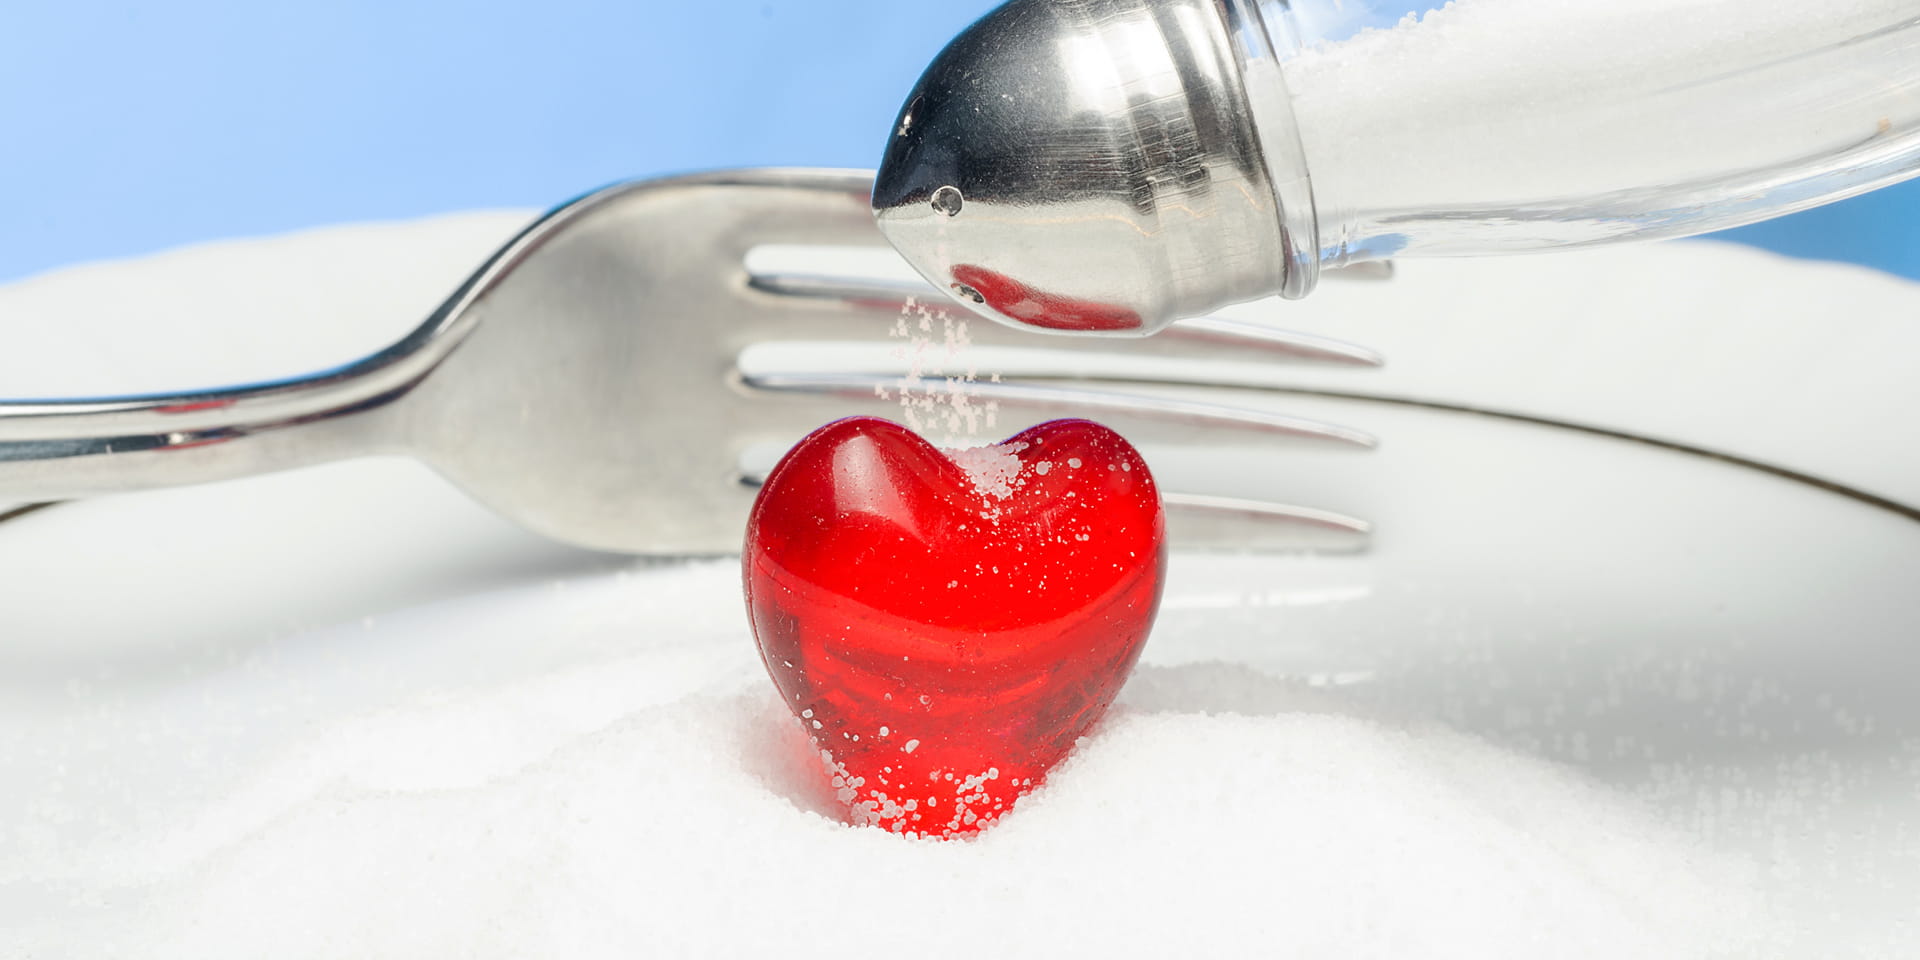 fork cutting into a gummy heart while salt is sprinkled on it